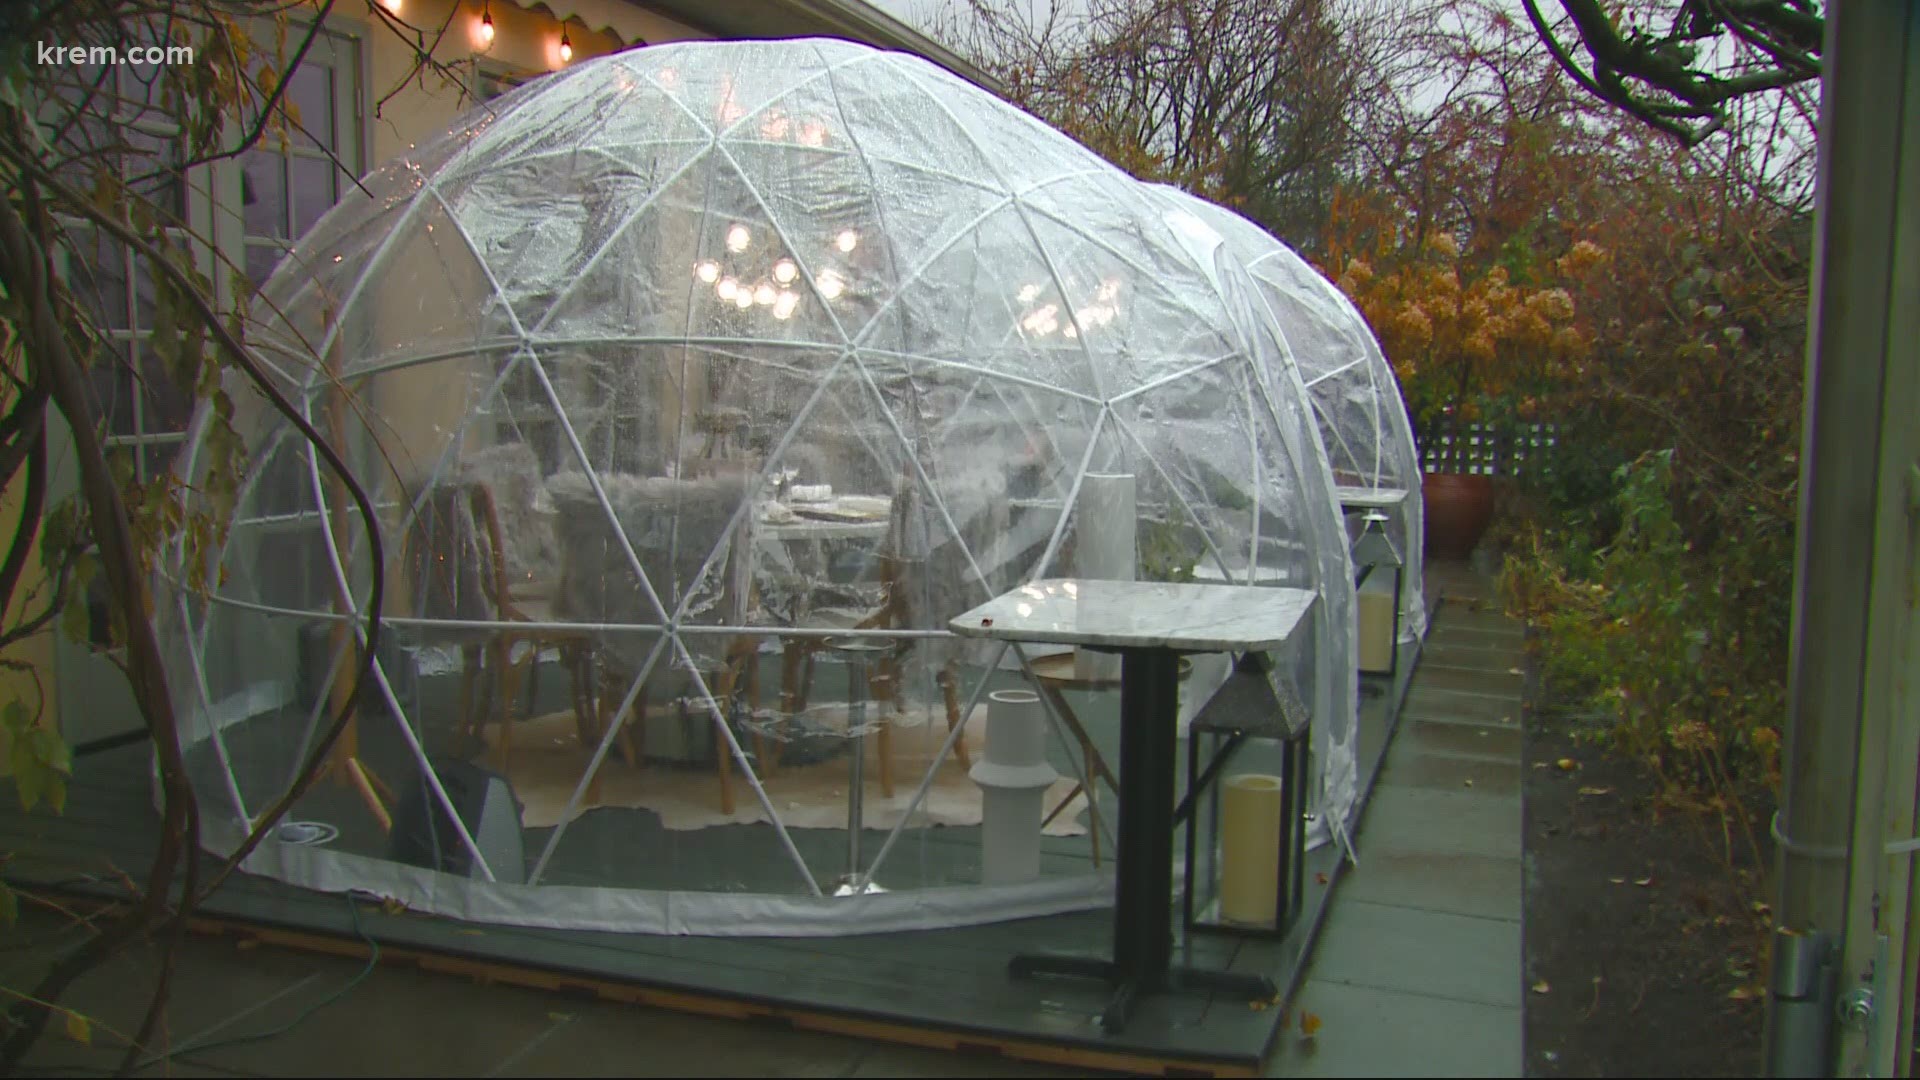 Some Spokane area restaurants are now moving their dining outdoors as part of the state's new guidelines.